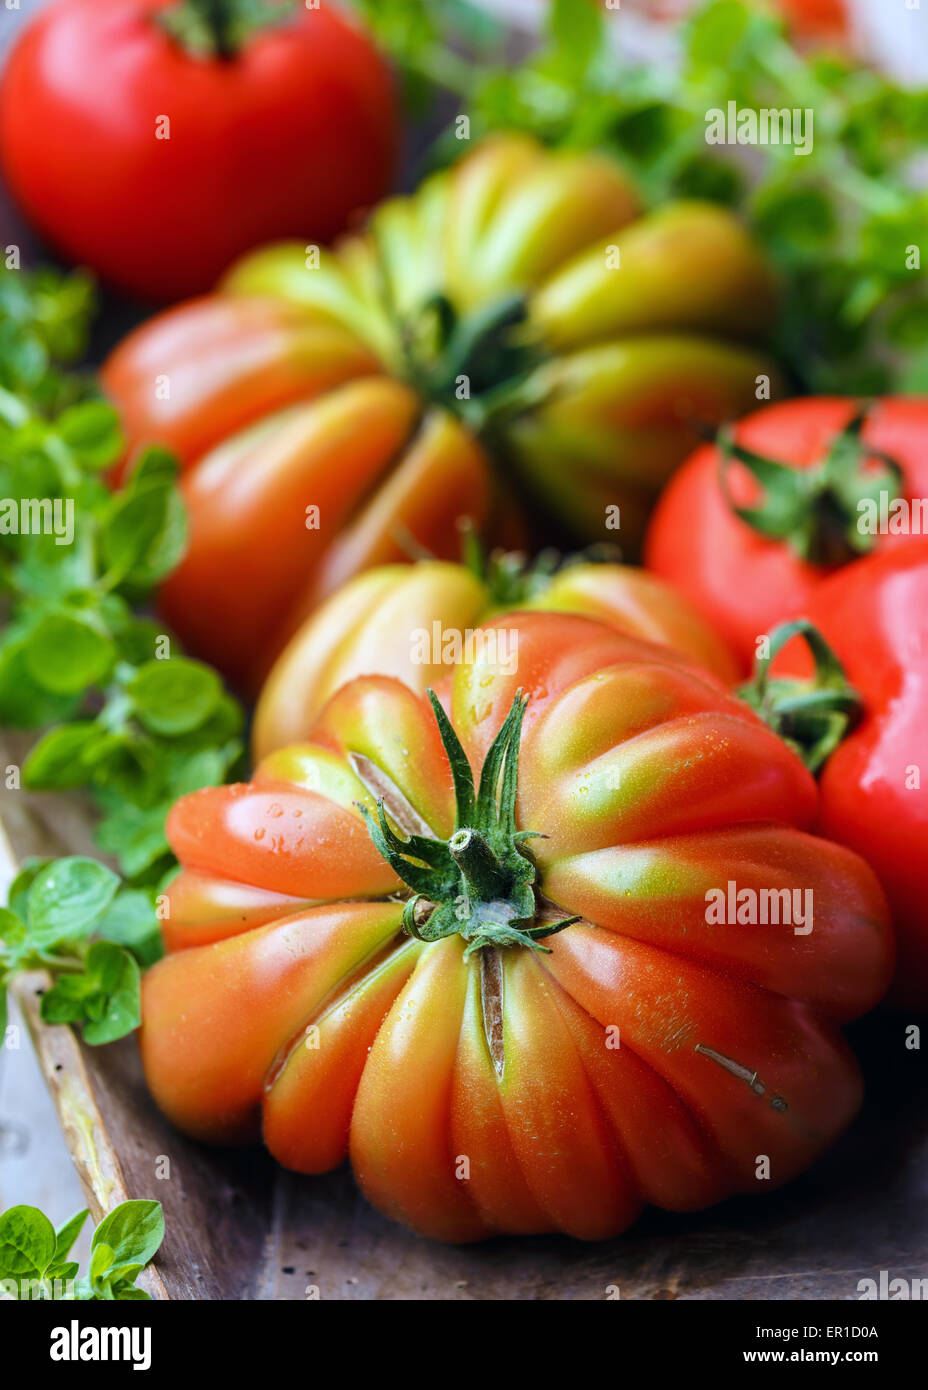 Tomatoes variety 'Cuore di Bue' Stock Photo